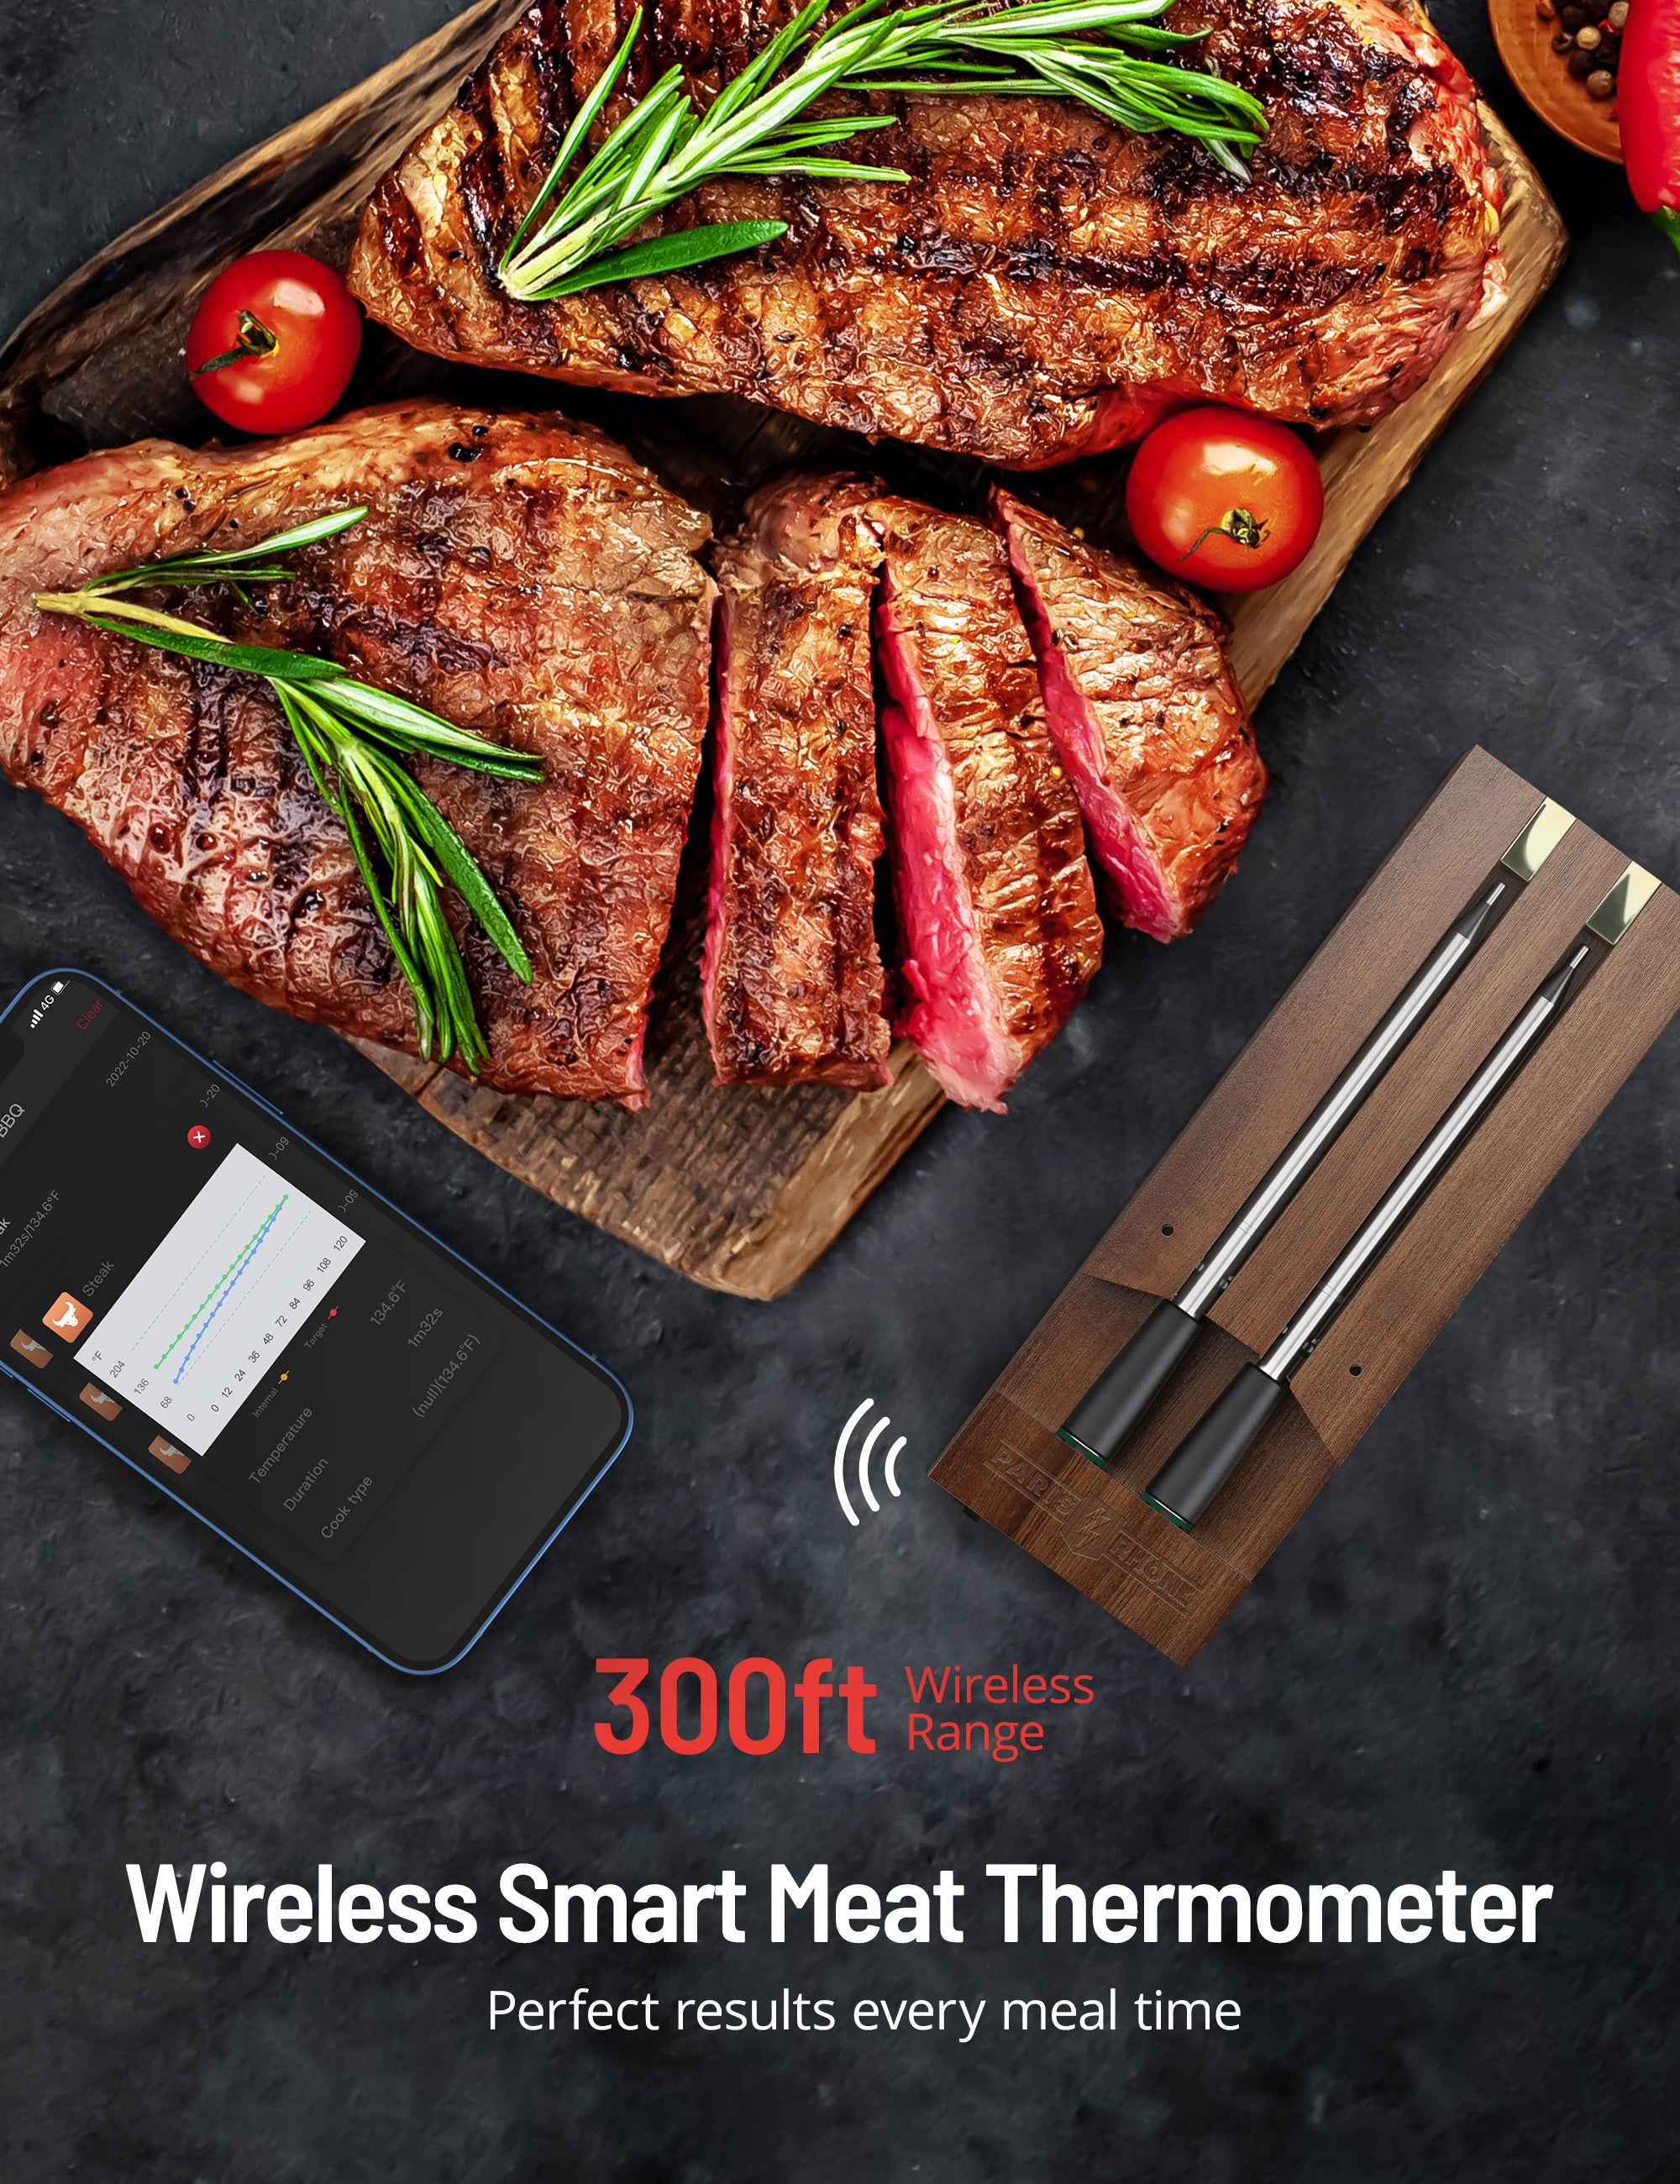 Paris Rhône Meat Thermometer TM001, Advanced APP Cooking Guides Wireless